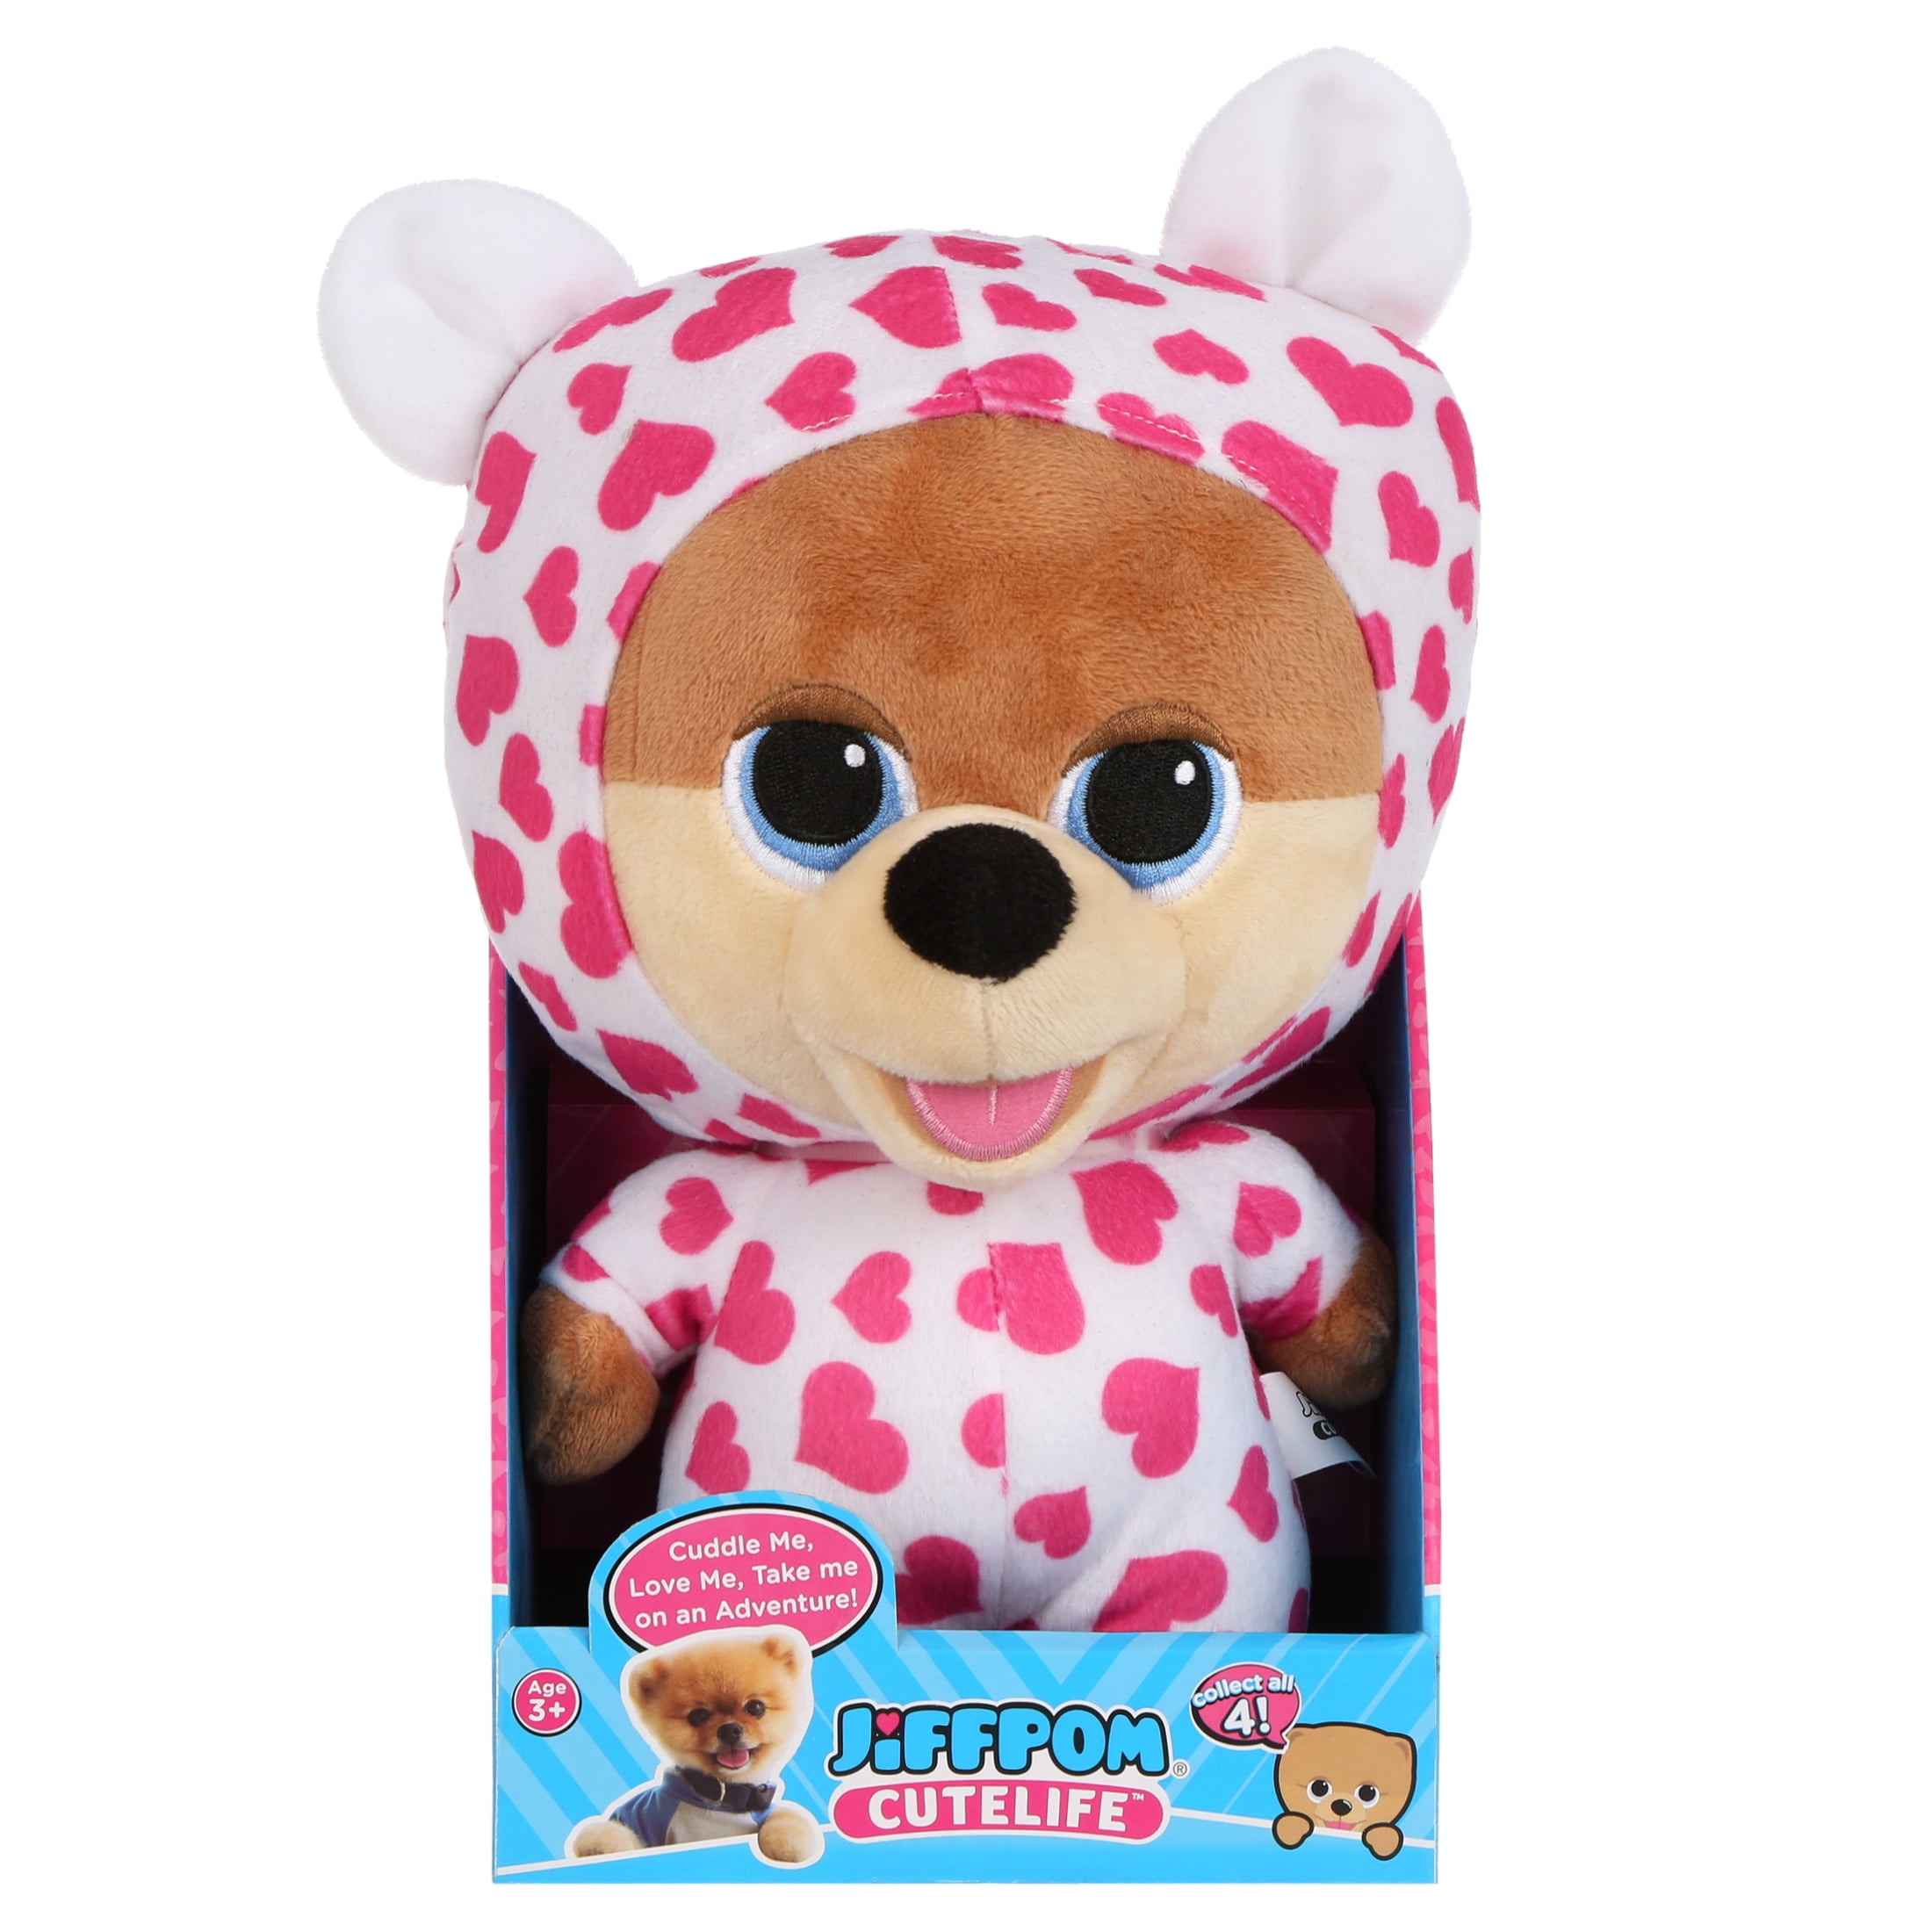 Details about   Jiffpom Cutelife ALLSTAR 11" plush .SOFT AND CUDDLY!! 